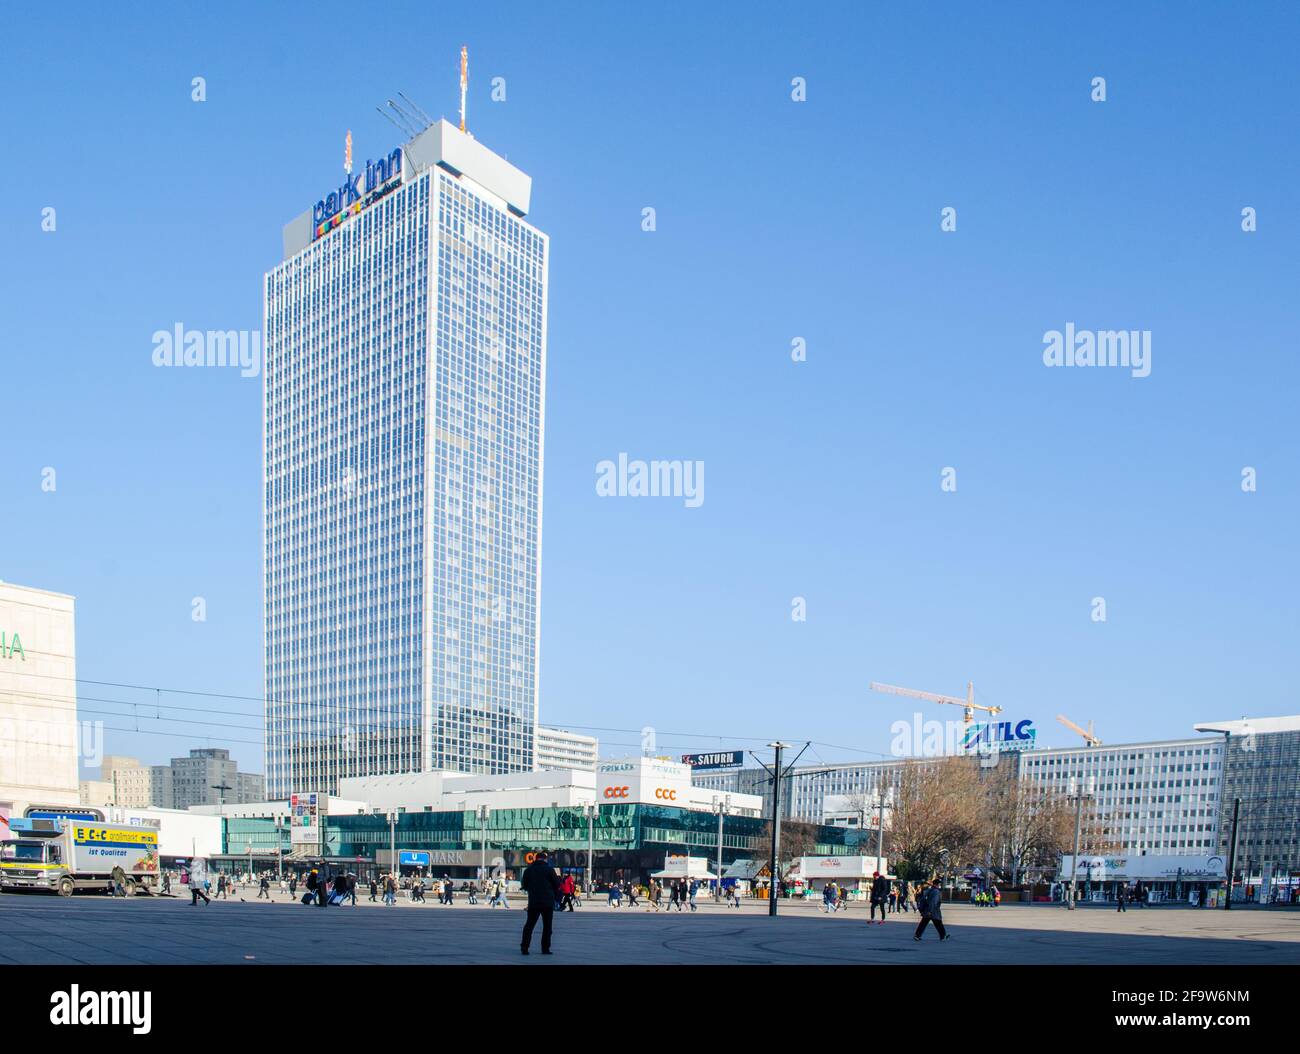 Page 2 - Primark Store Germany High Resolution Stock Photography and Images  - Alamy